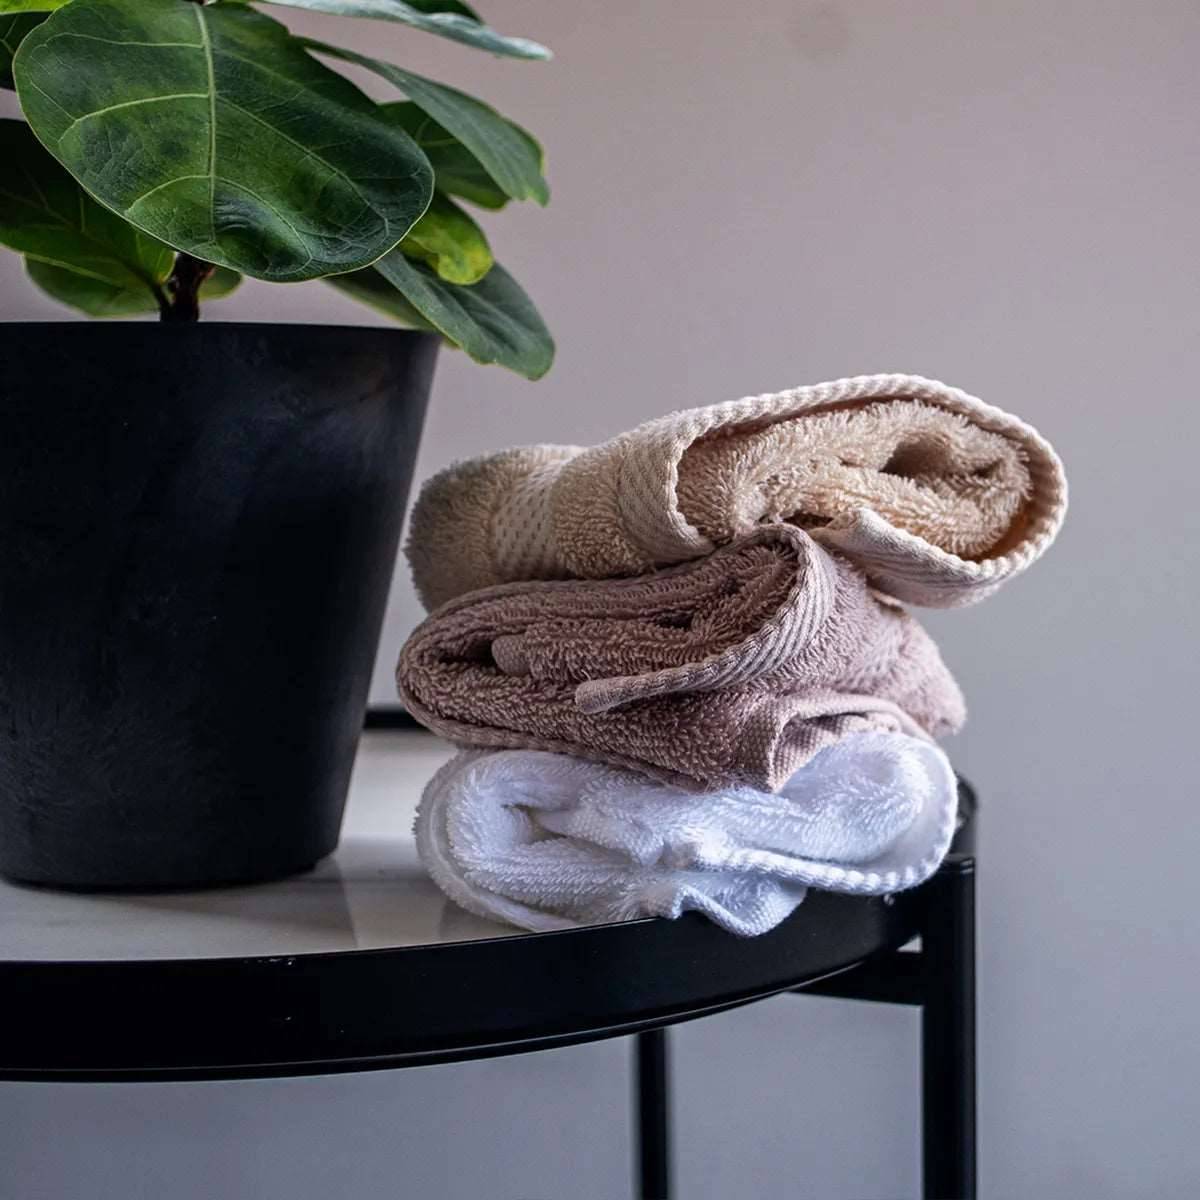 KapasLUXE® extra-long staple cotton face towel (x2) in Malaysia and Singapore